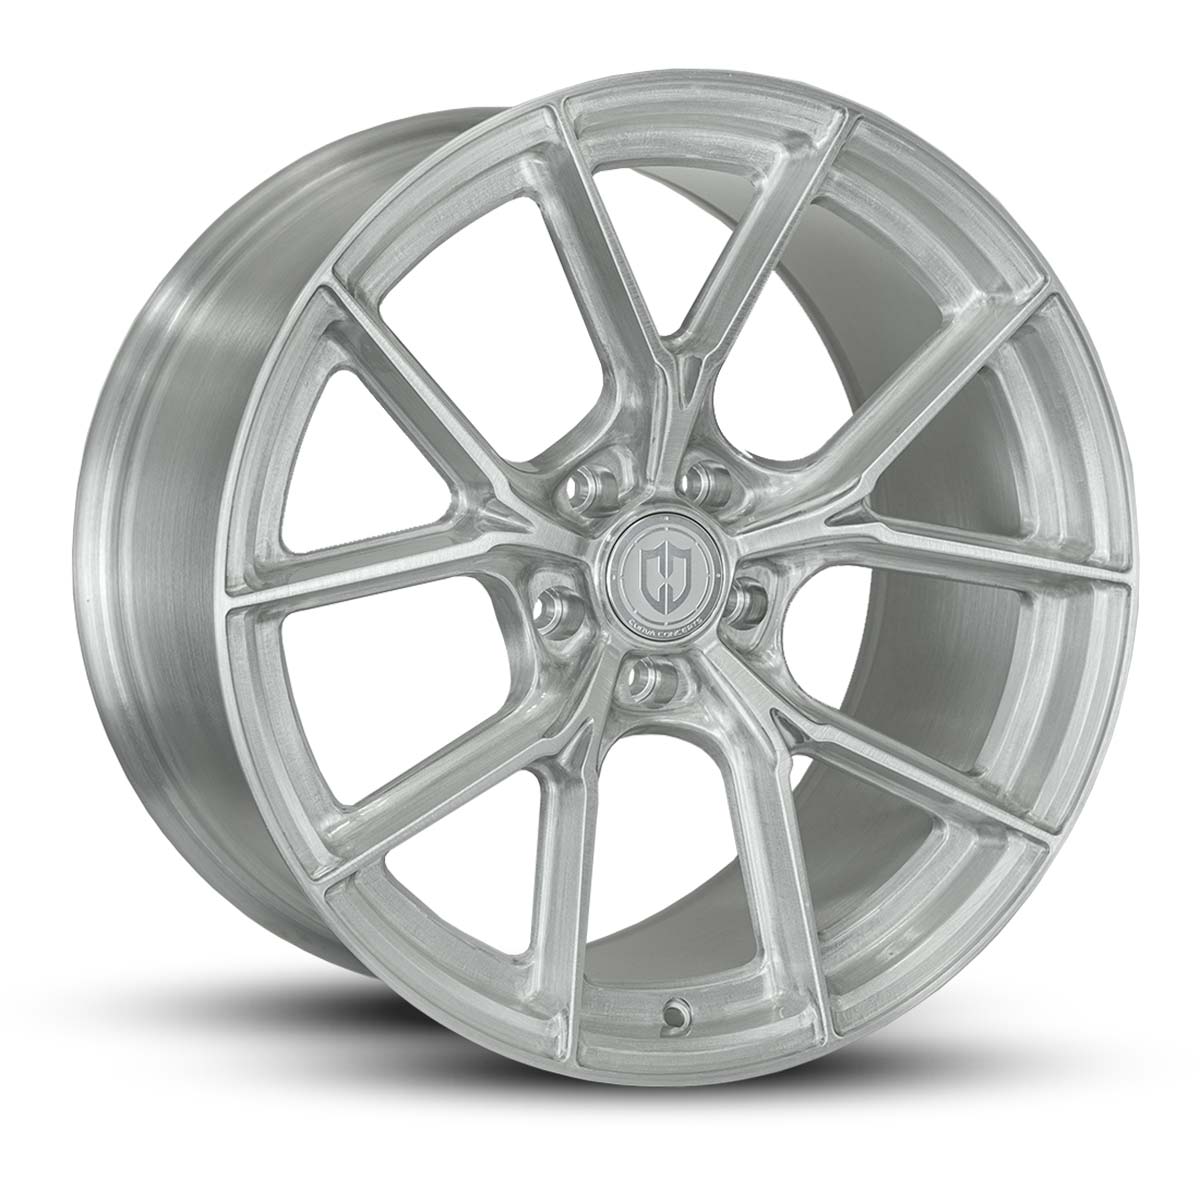 curva concepts cff70 brushed clear coat flow forged wheel